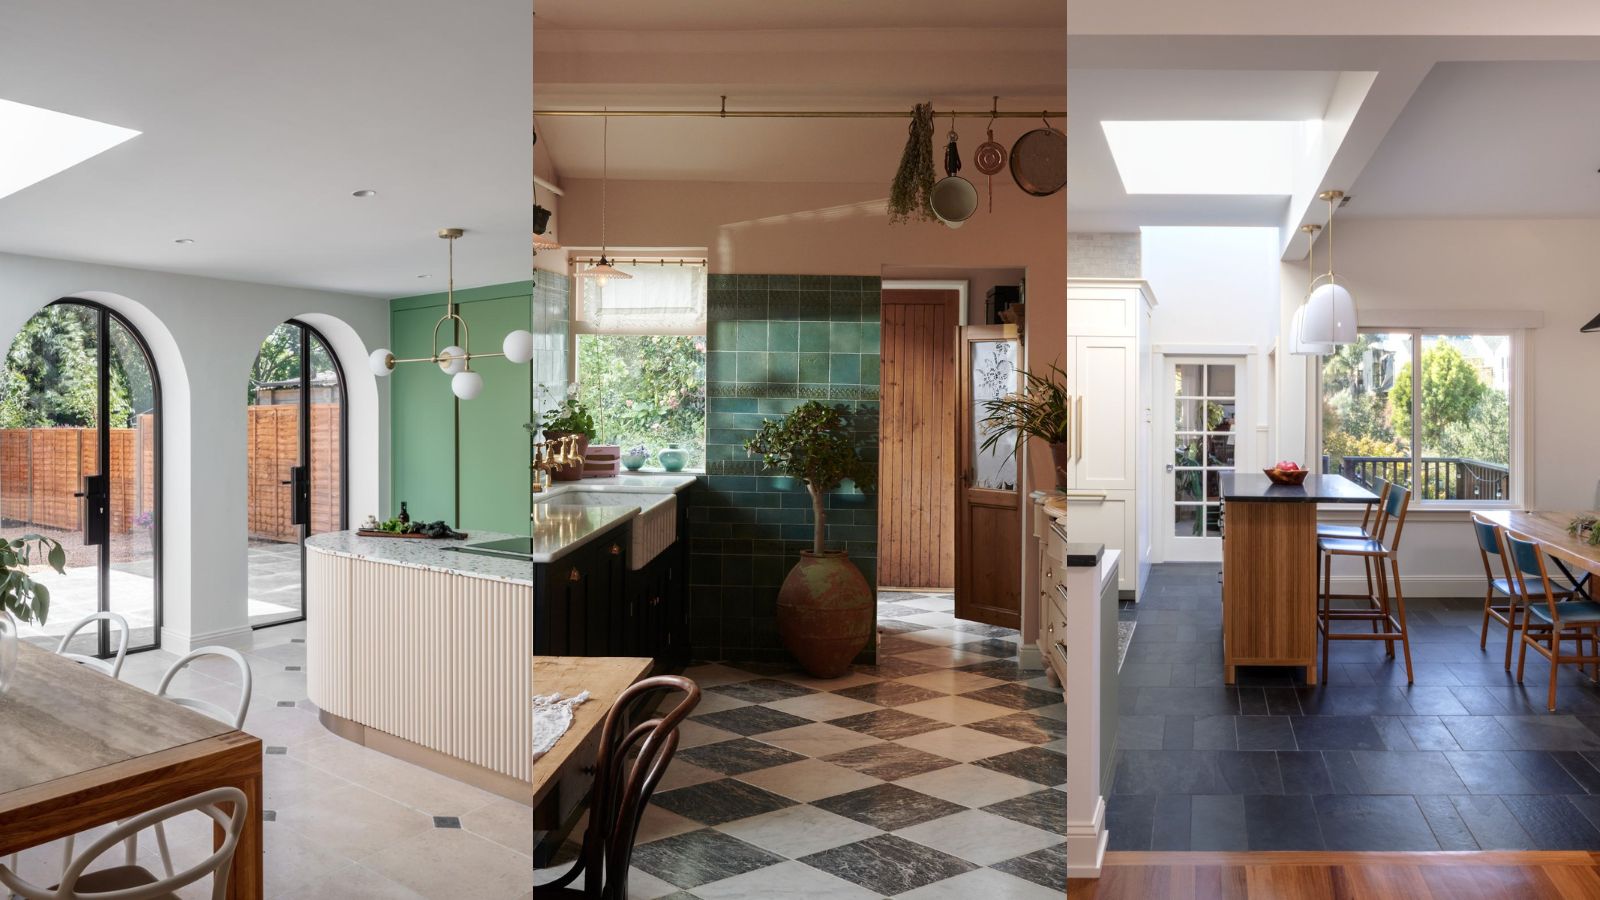 Enhancing the heart of your home: Essential considerations for kitchen construction